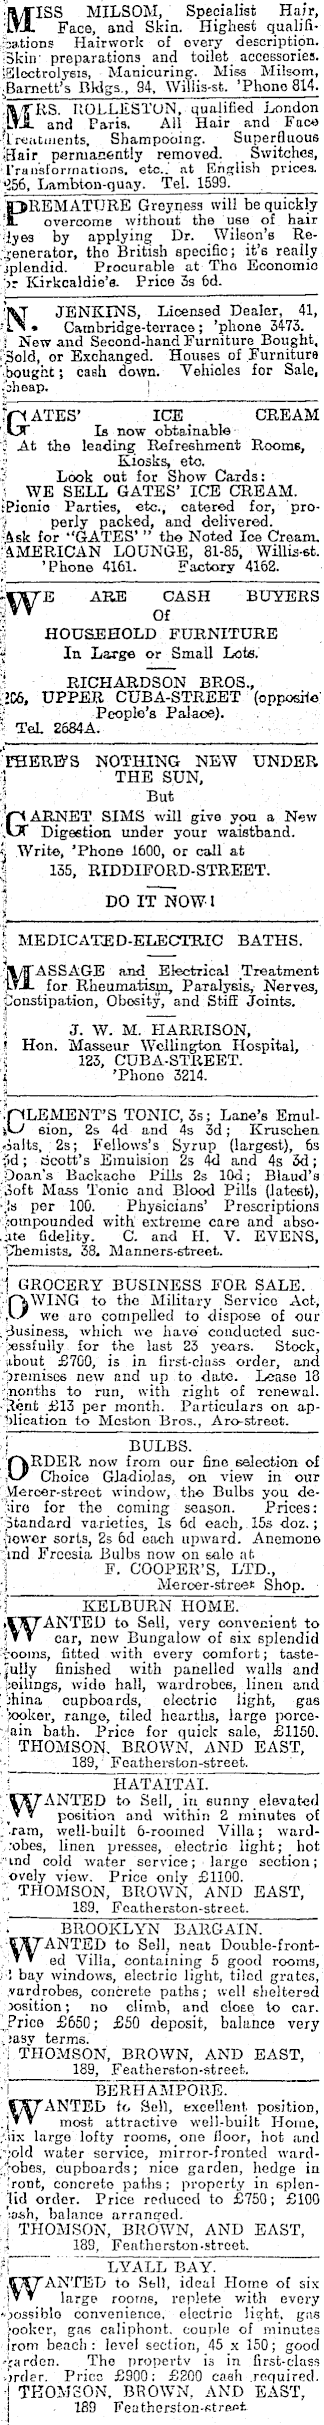 Papers Past Newspapers Evening Post 24 January 1917 Page 1 Advertisements Column 1